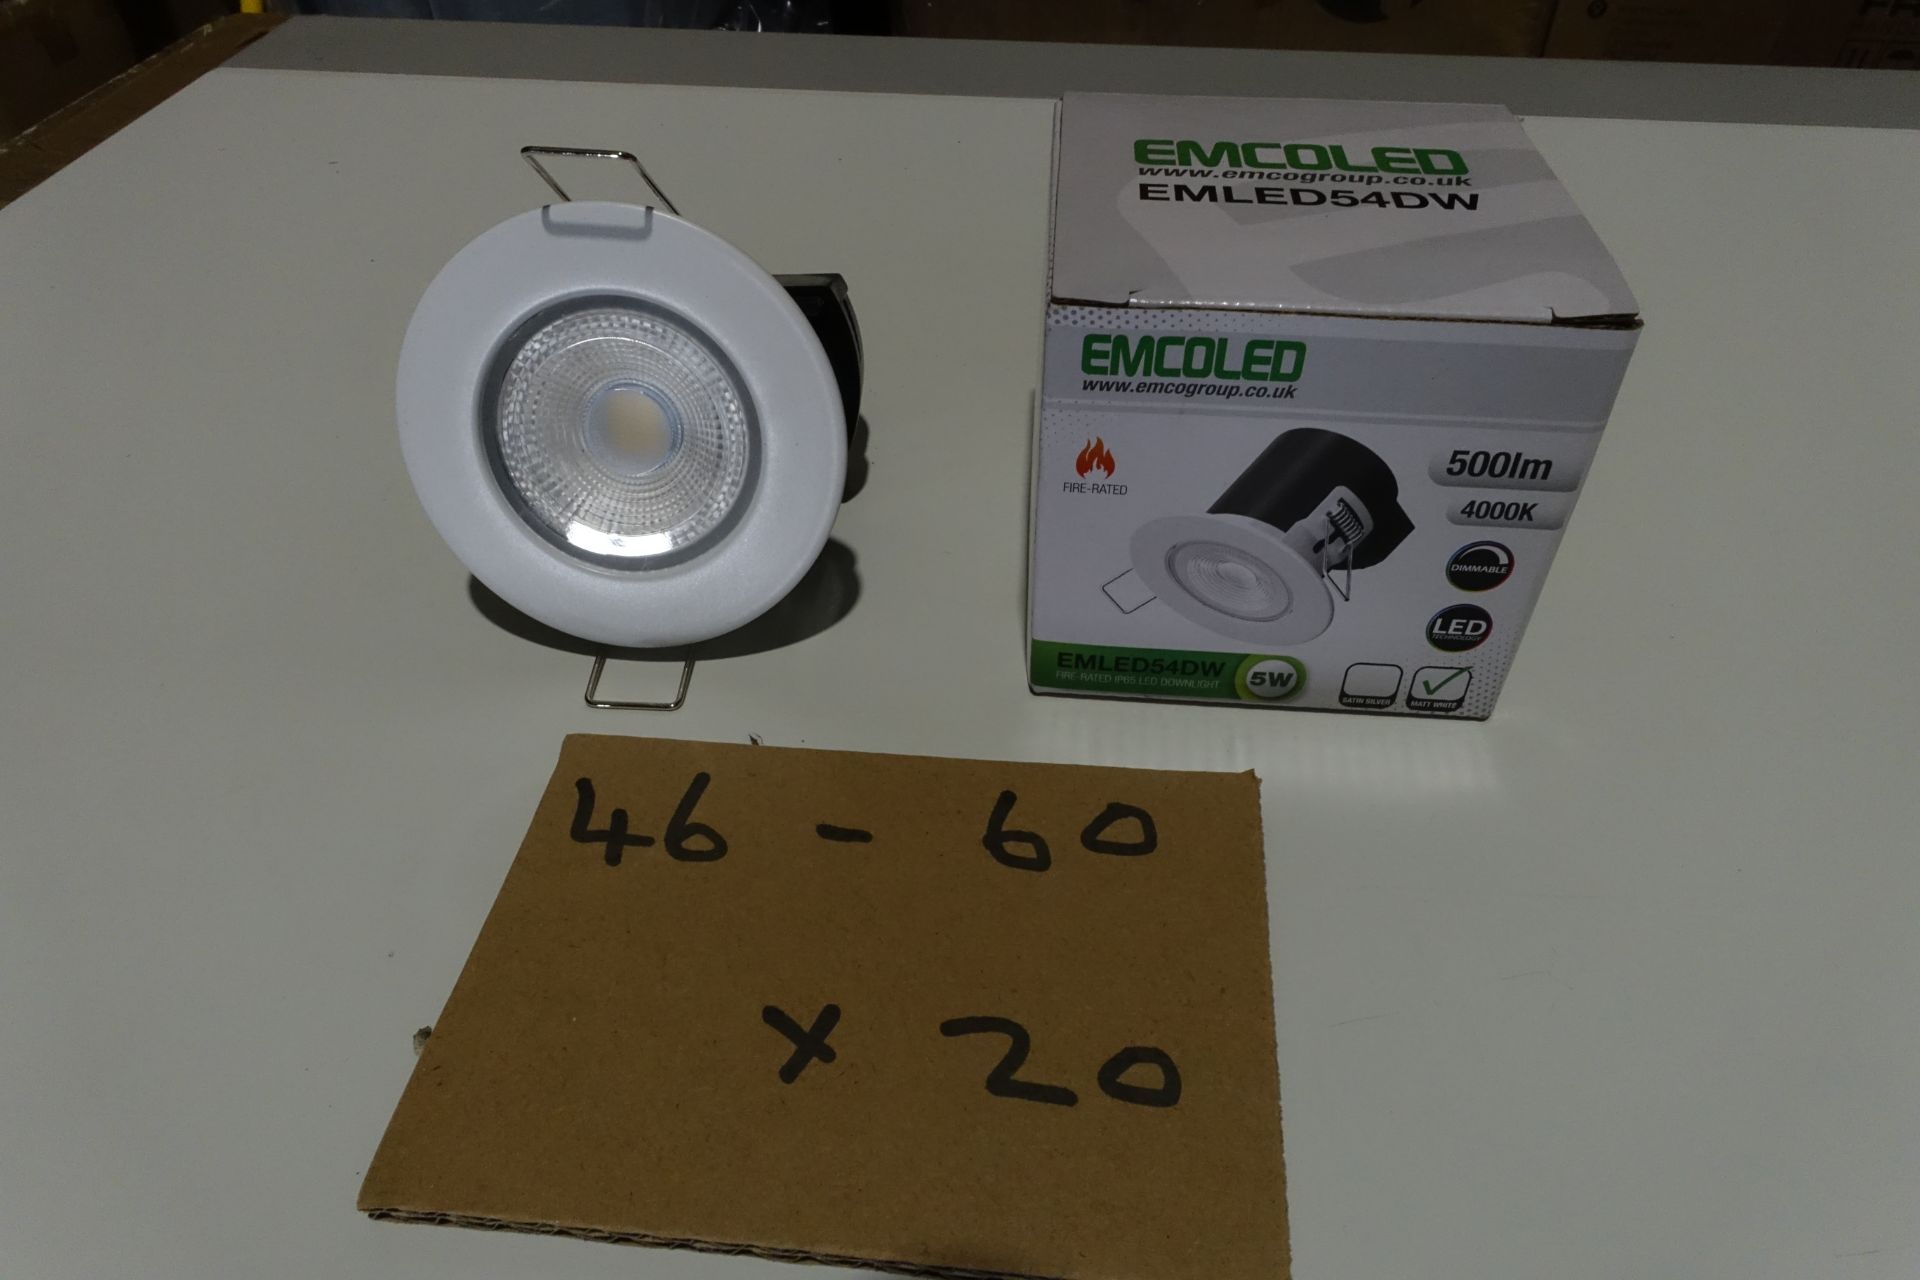 20 x EMCOLED EMLED54DW 5W LED Downlights Dimmable Fire Rated 4000K MATT White Finish